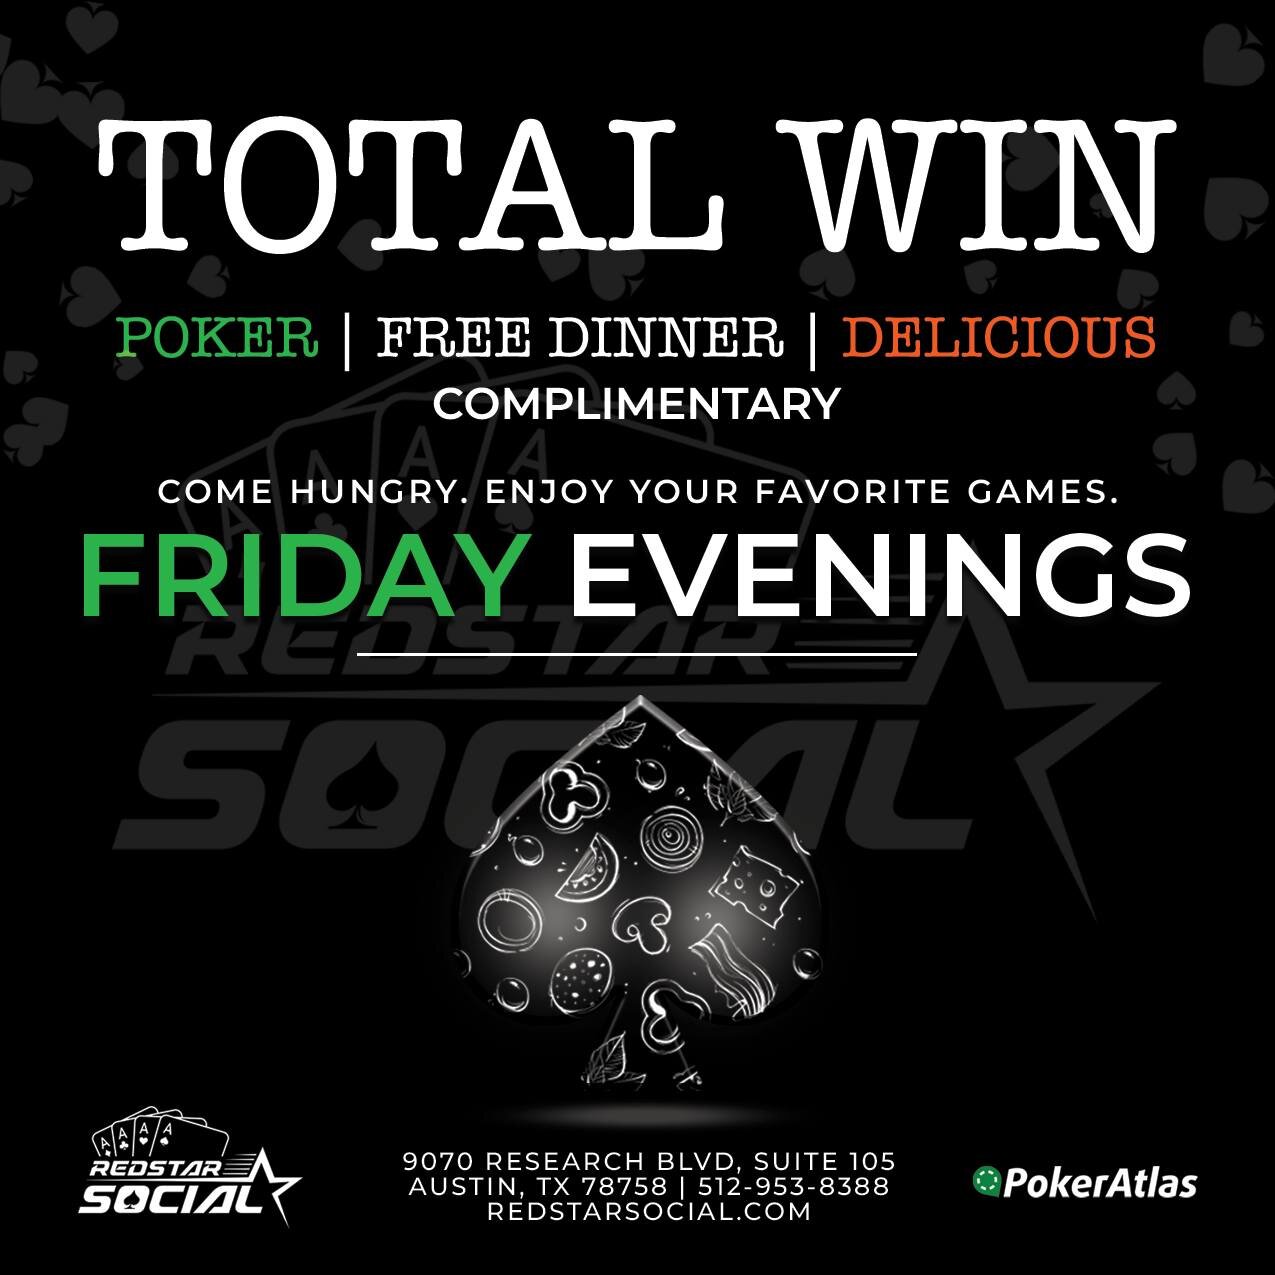 Friday poker + complimentary dinner for all members. Usually arrives between 6pm to 7pm. Come hungry, we have you covered.

Doors open at 12pm for $1/2 NLH with bomb 💣 pots.